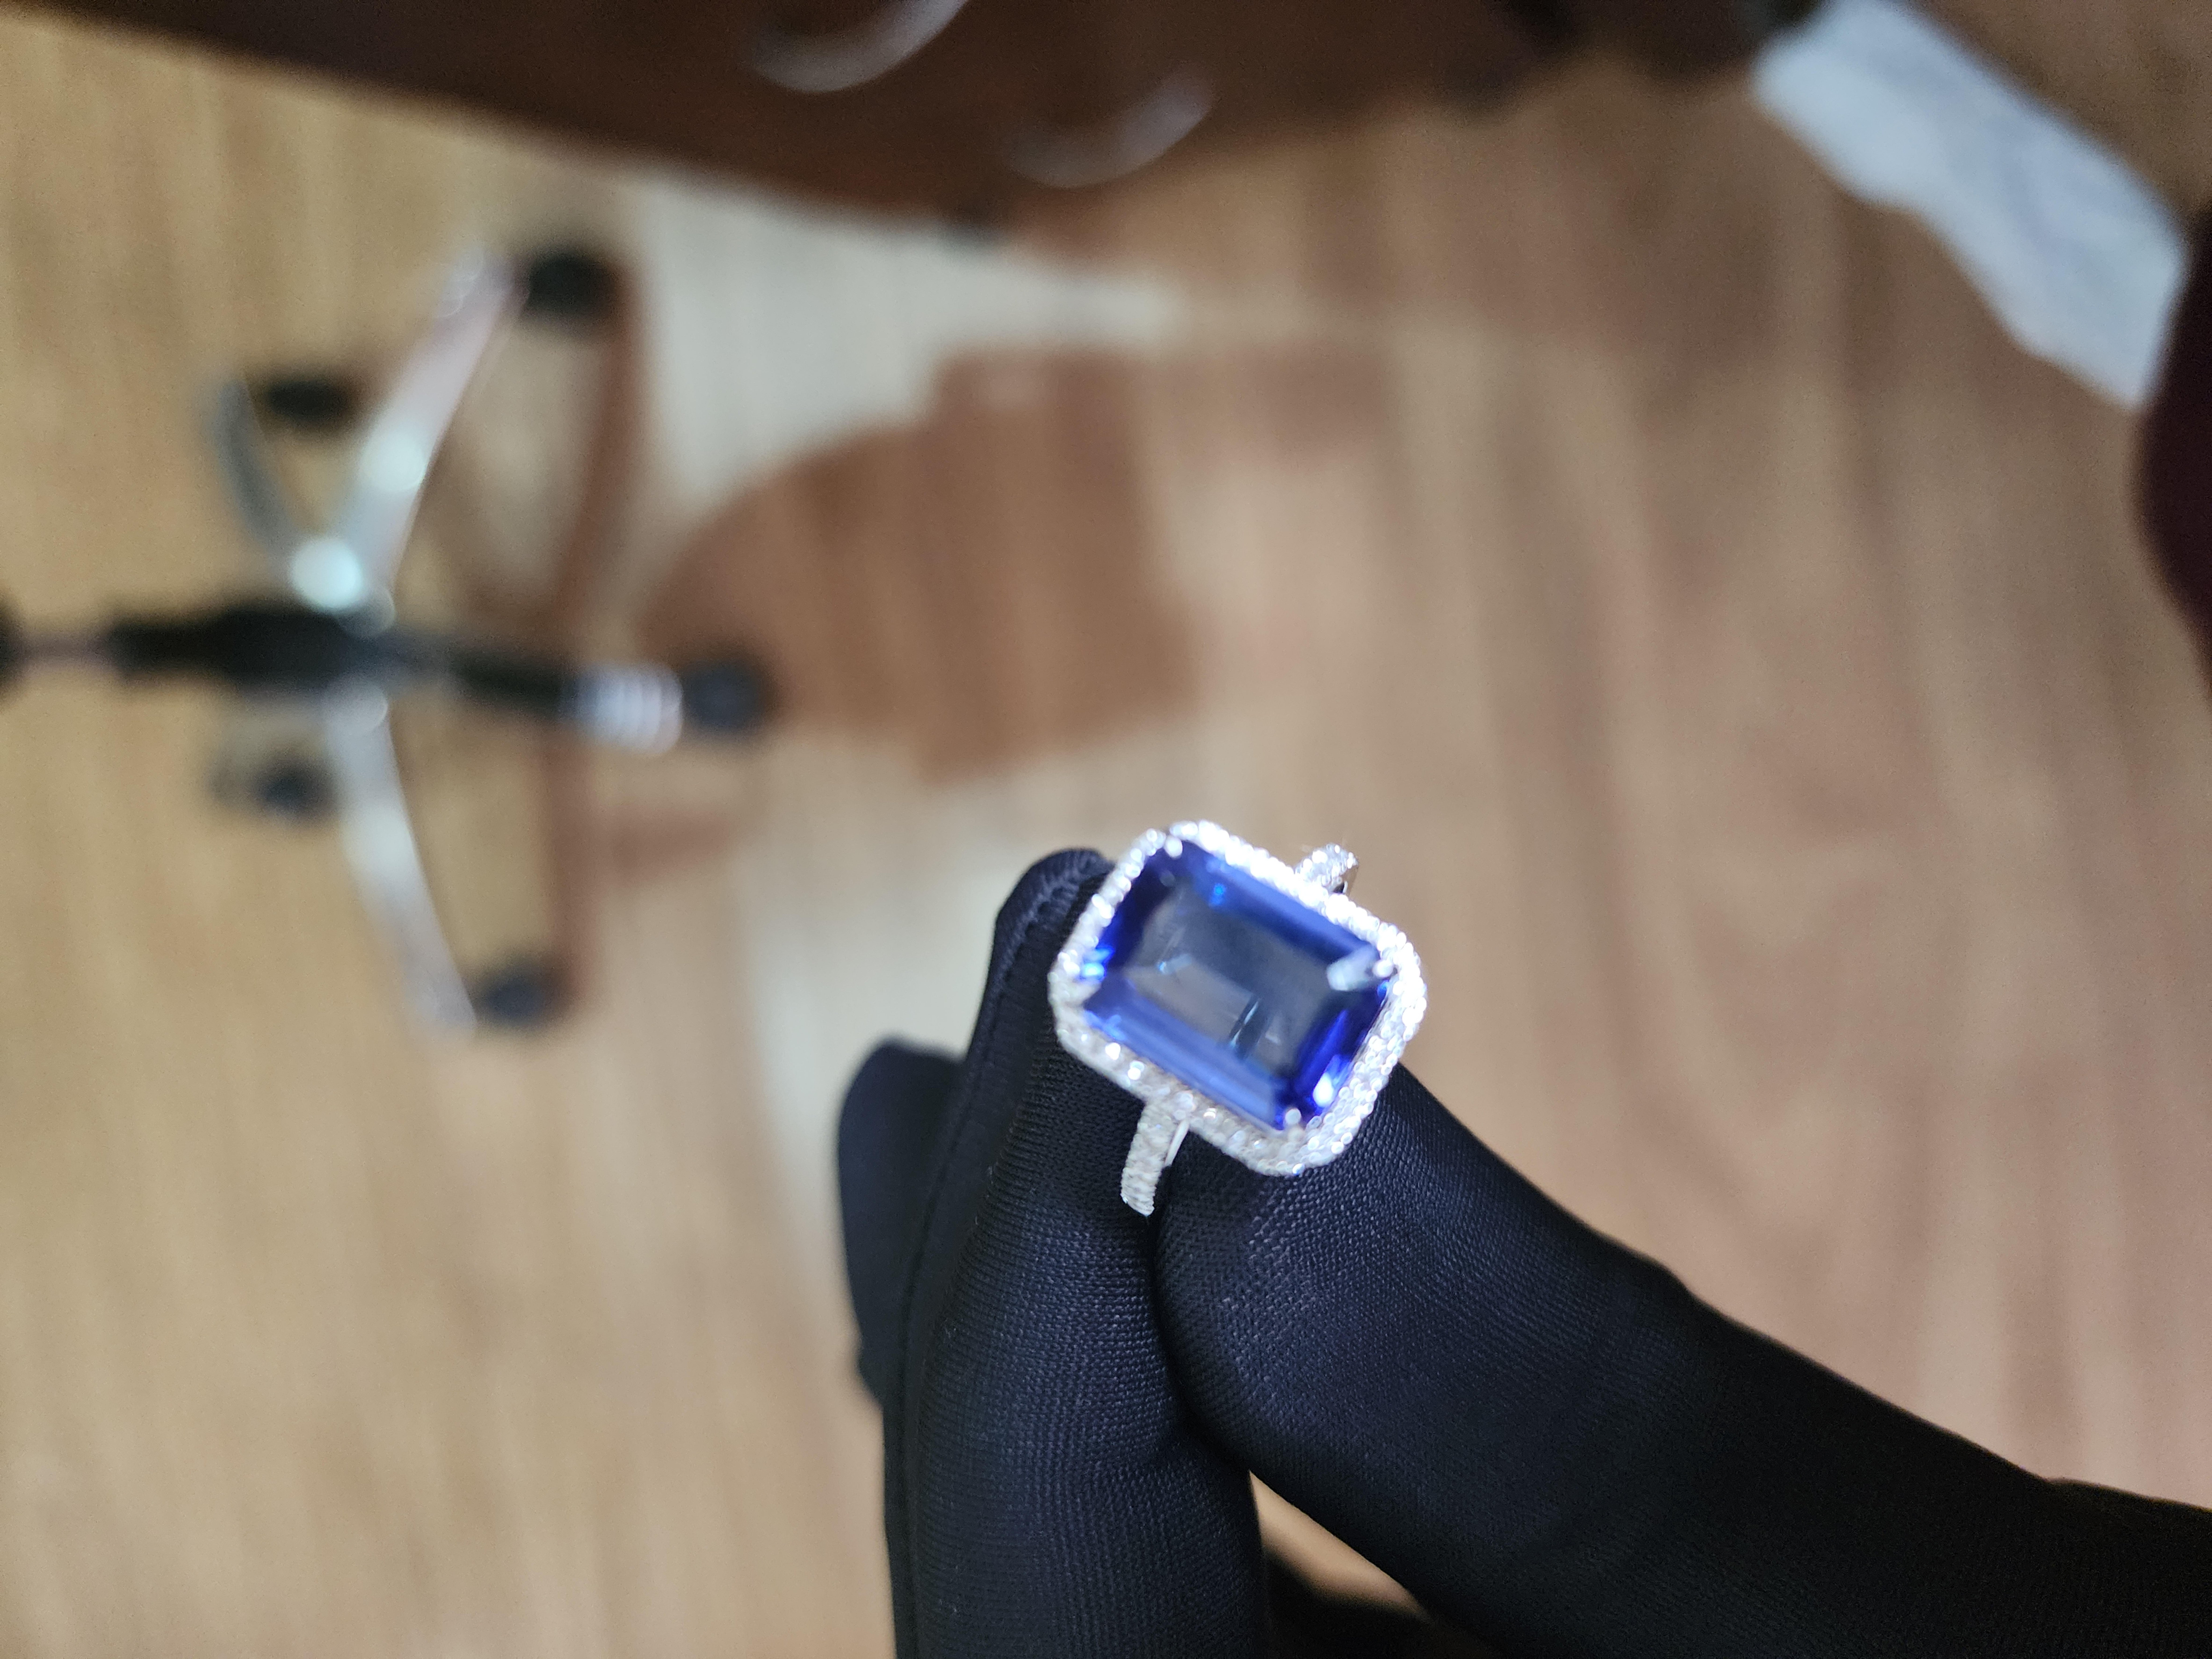 This extraordinary 5.56 carat Tanzanite is a true gemstone that is highly treasured. It is surrounded by a total of 0.69 carats of shimmering white diamonds, which adds to the overall beauty and elegance of the piece. The oval-cut gem exhibits the